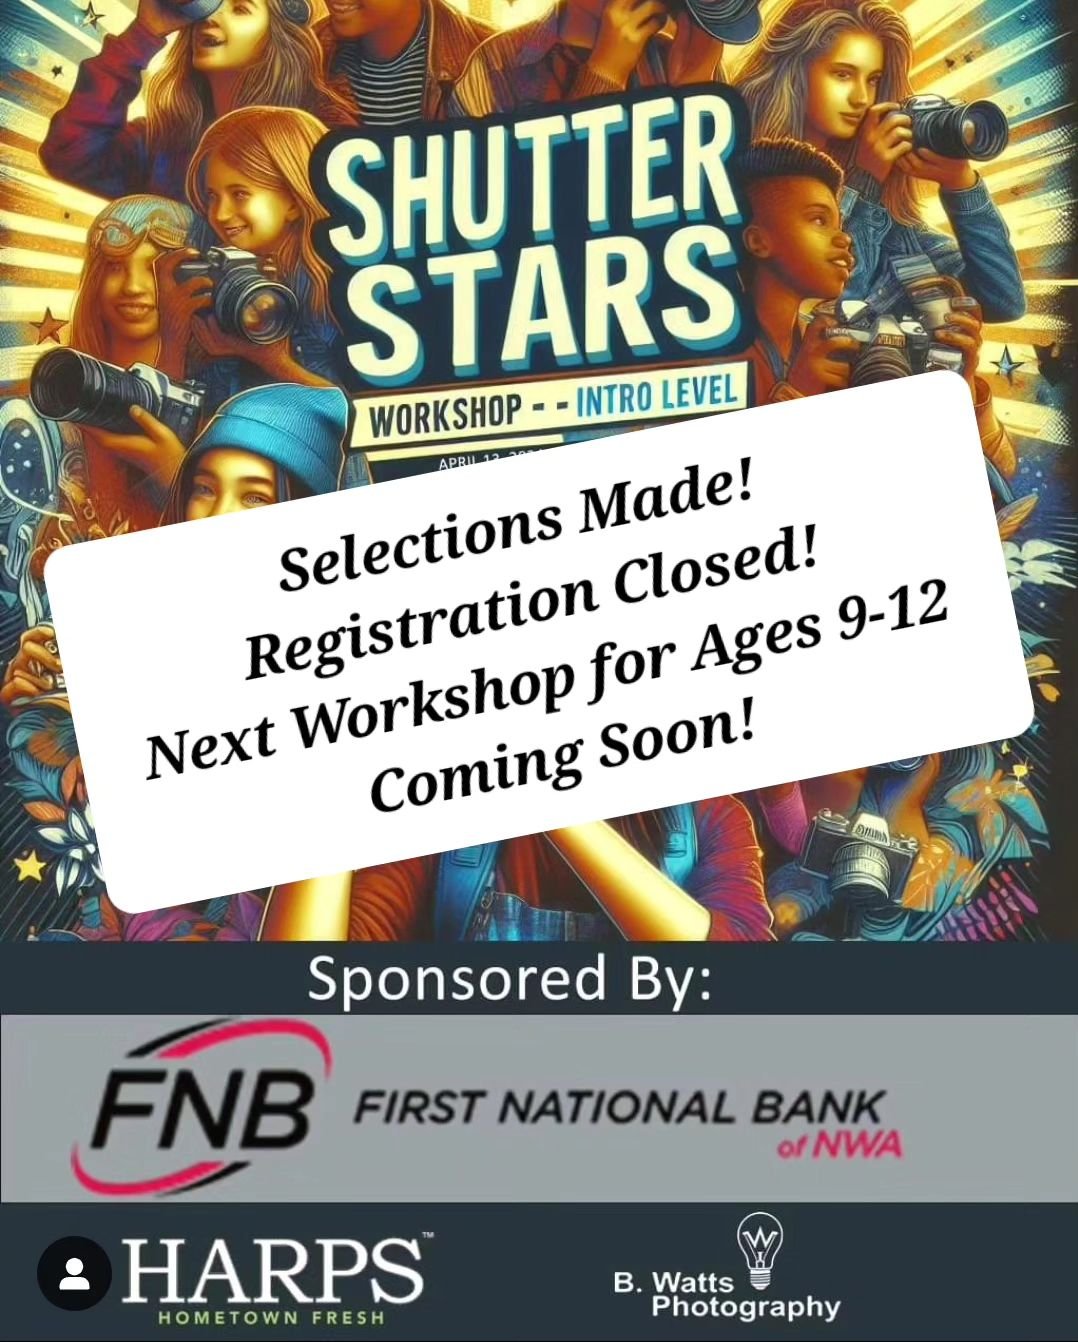 📢 Exciting News! 🎉 Selections for the Shutter Stars Workshop have been made, and registration is now closed. Stay tuned for more opportunities and our next workshop for ages 9-12! 📸✨ #ShutterStars #PhotographyWorkshop #StayTuned